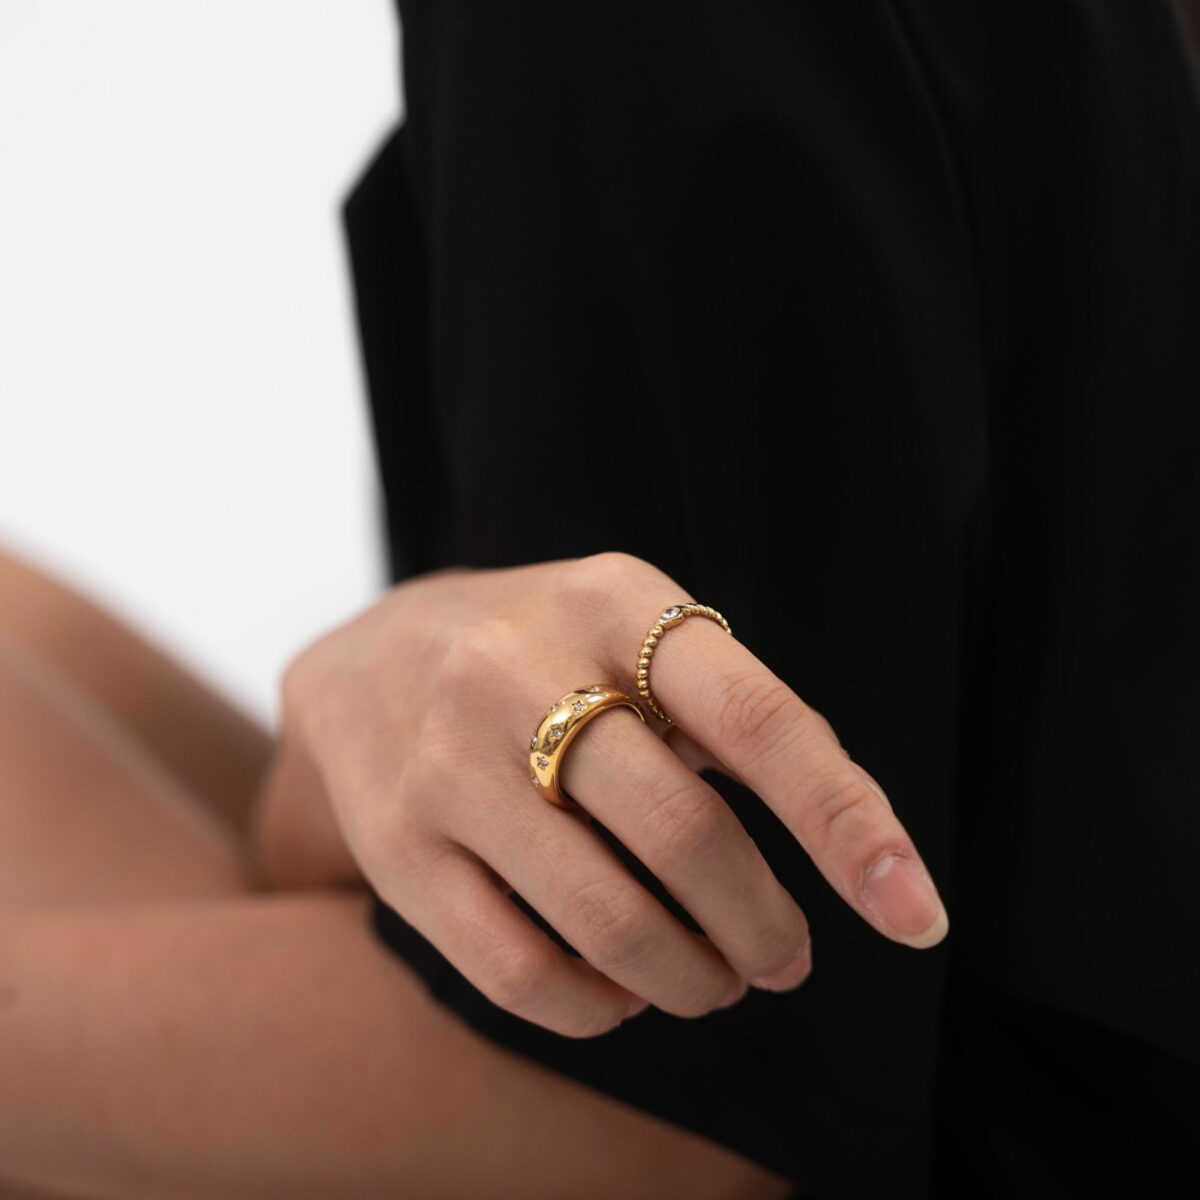 https://m.clubbella.co/product/gold-solitaire-wavy-ring/ DSC00085